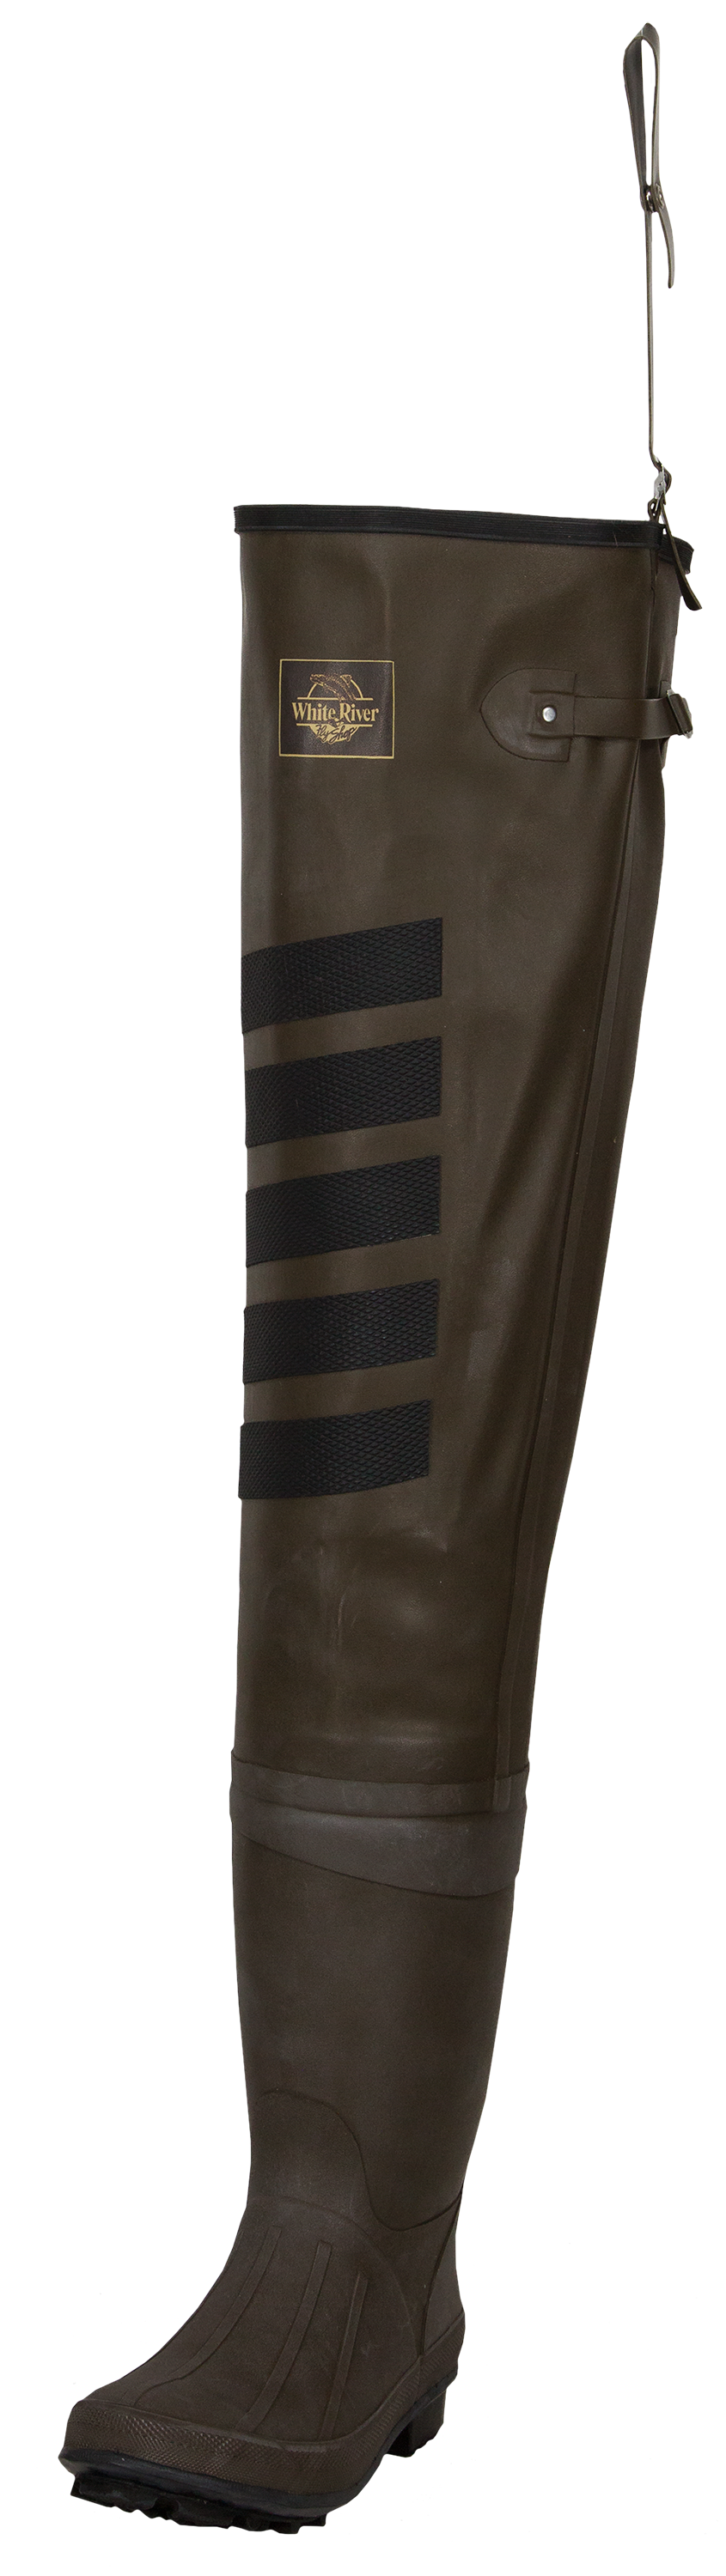 White River Fly Shop Rubber Boot-Foot Hip Waders for Men